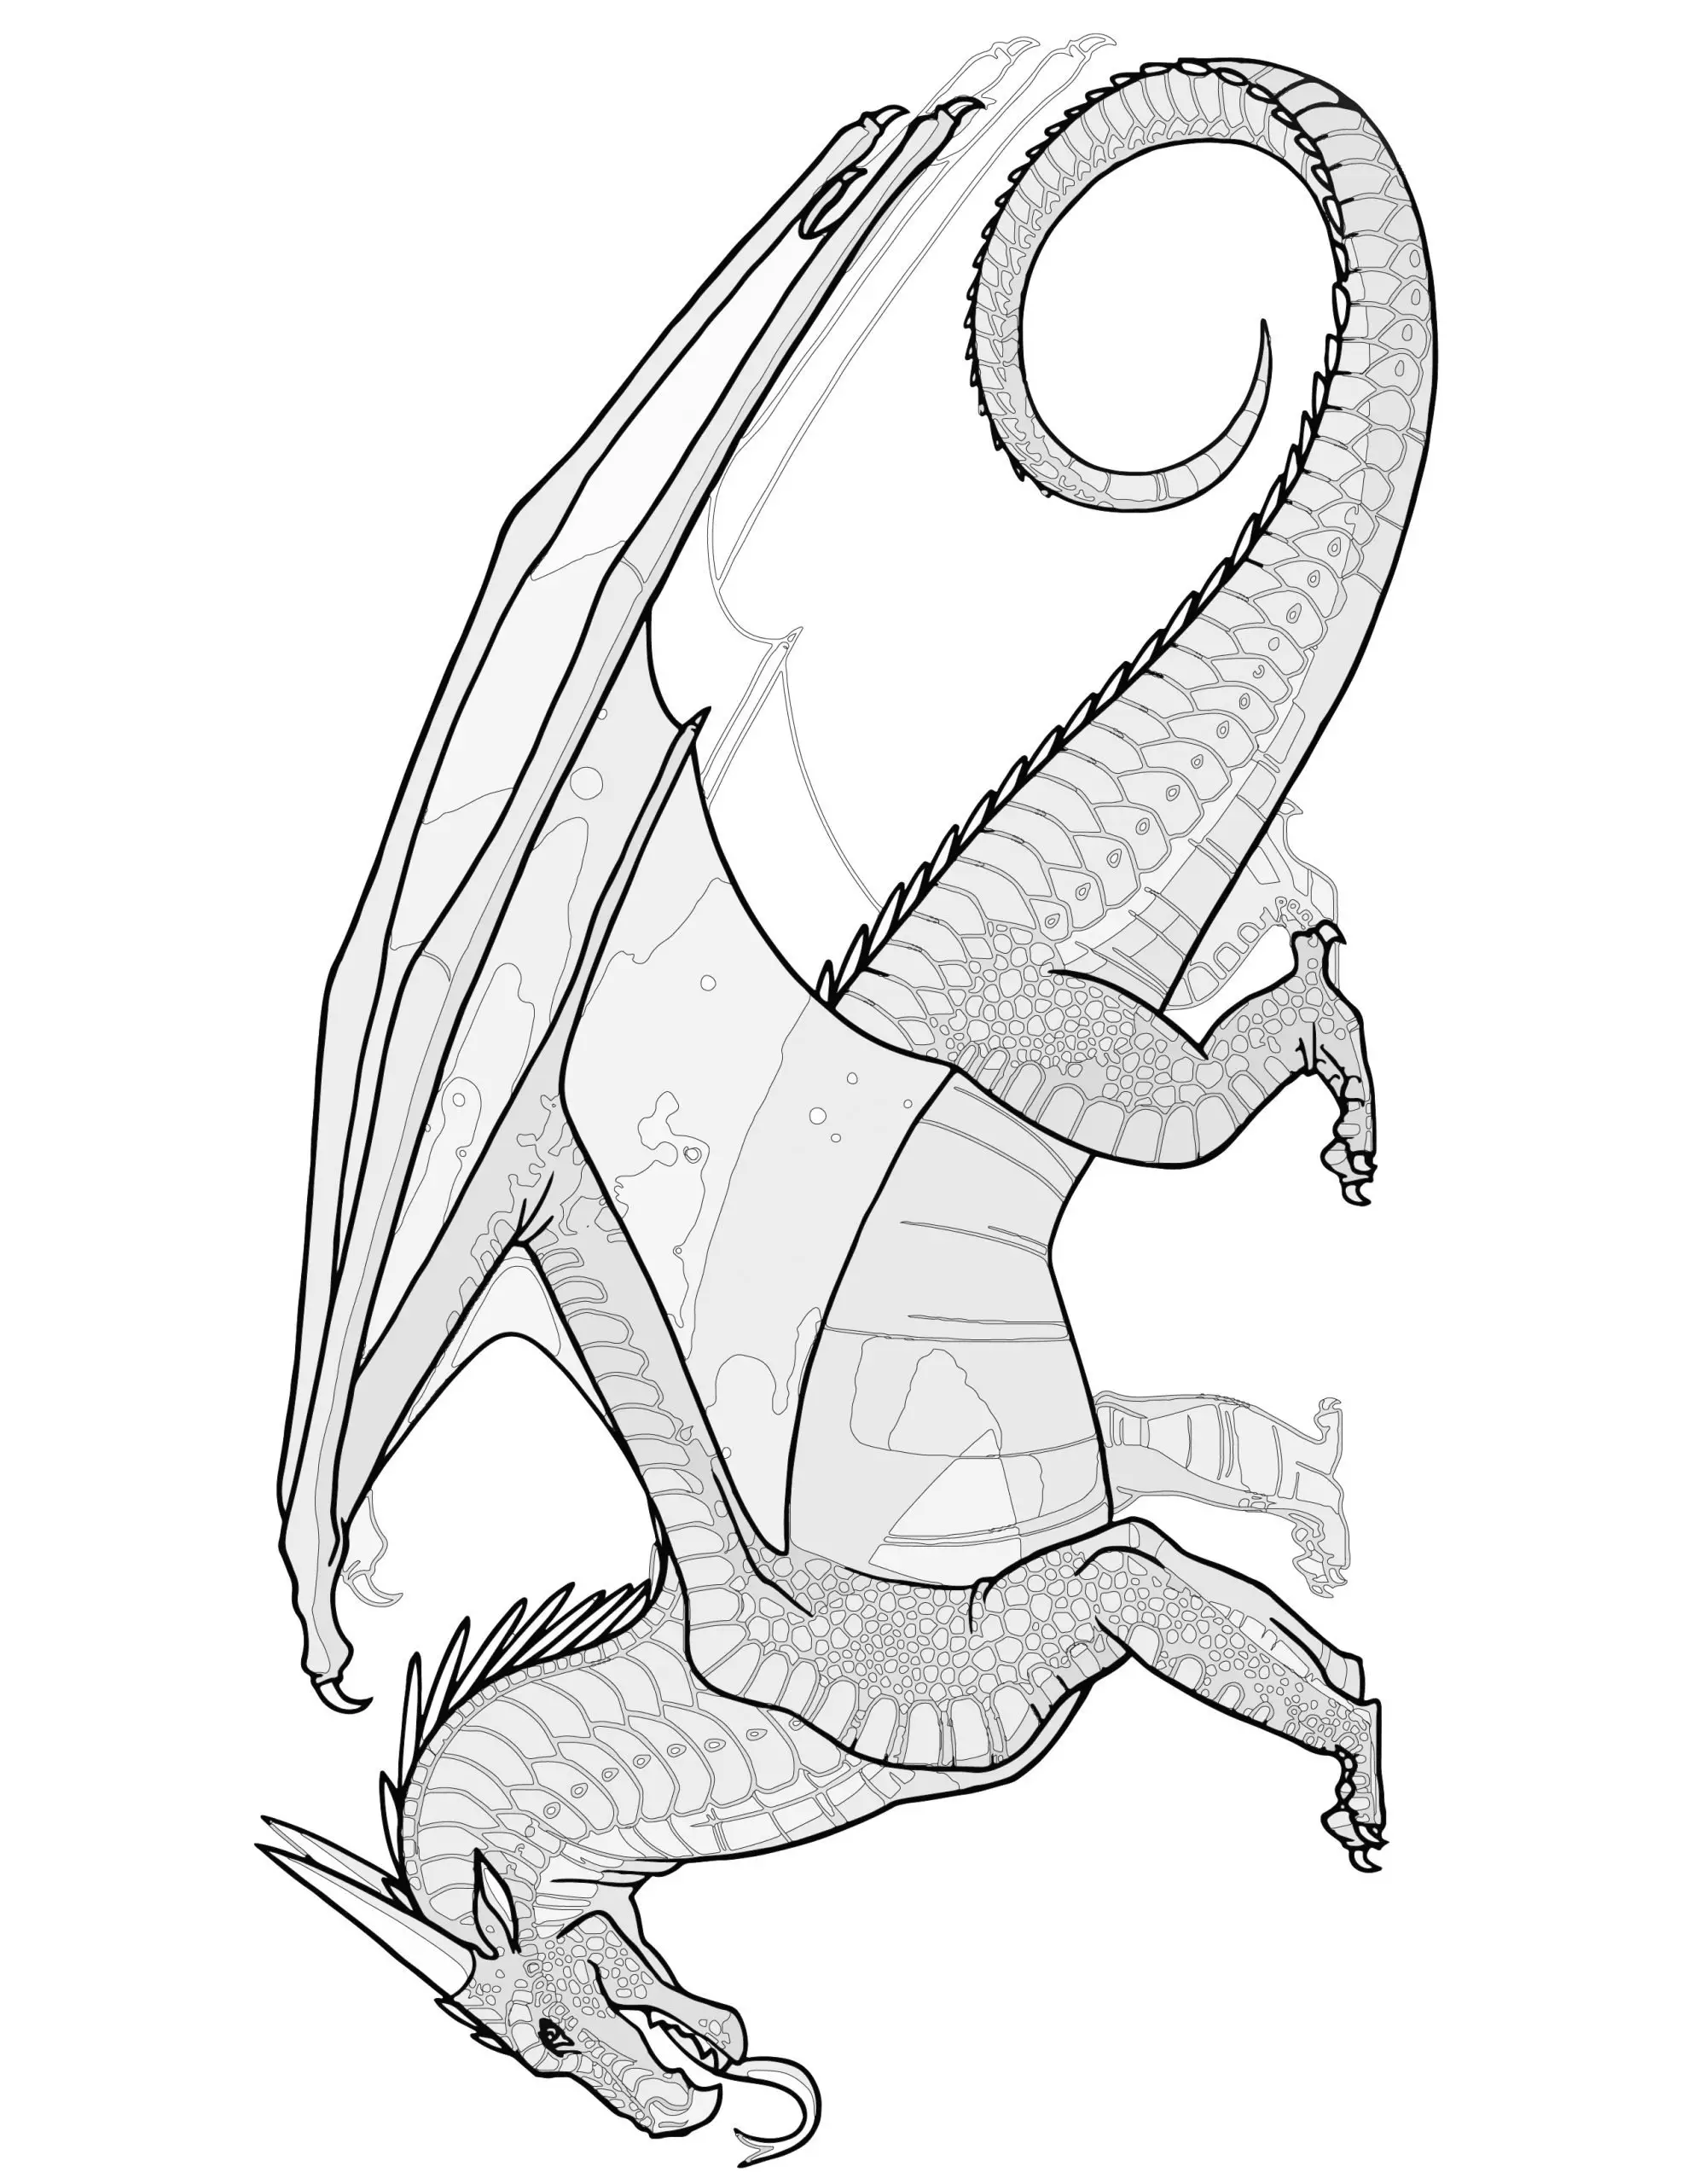 NIGHT Dragon Coloring Page Transparent Wings of Fire Coloring SHEET Pyrrhian Dragon Tribe